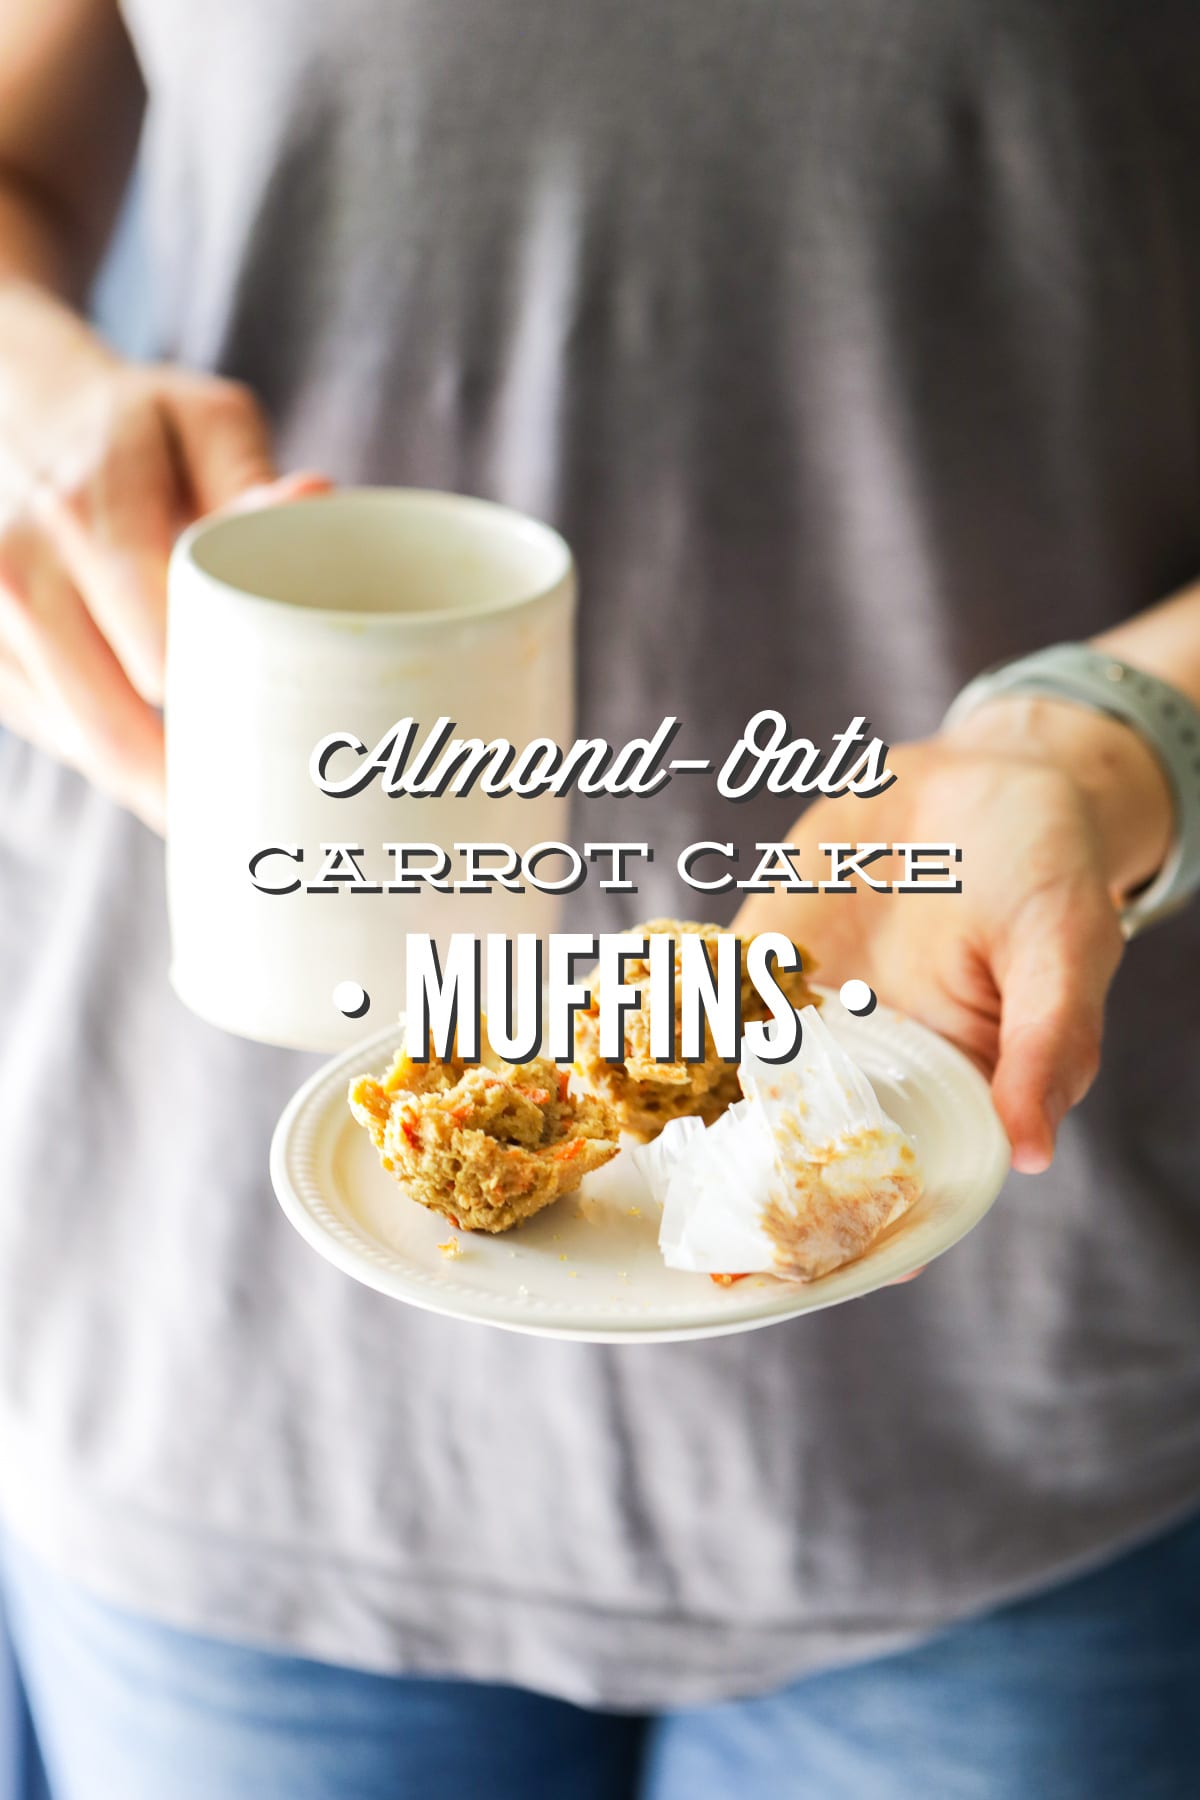 Almond-Oat Carrot Cake Muffins (One-Bowl, Gluten-Free)